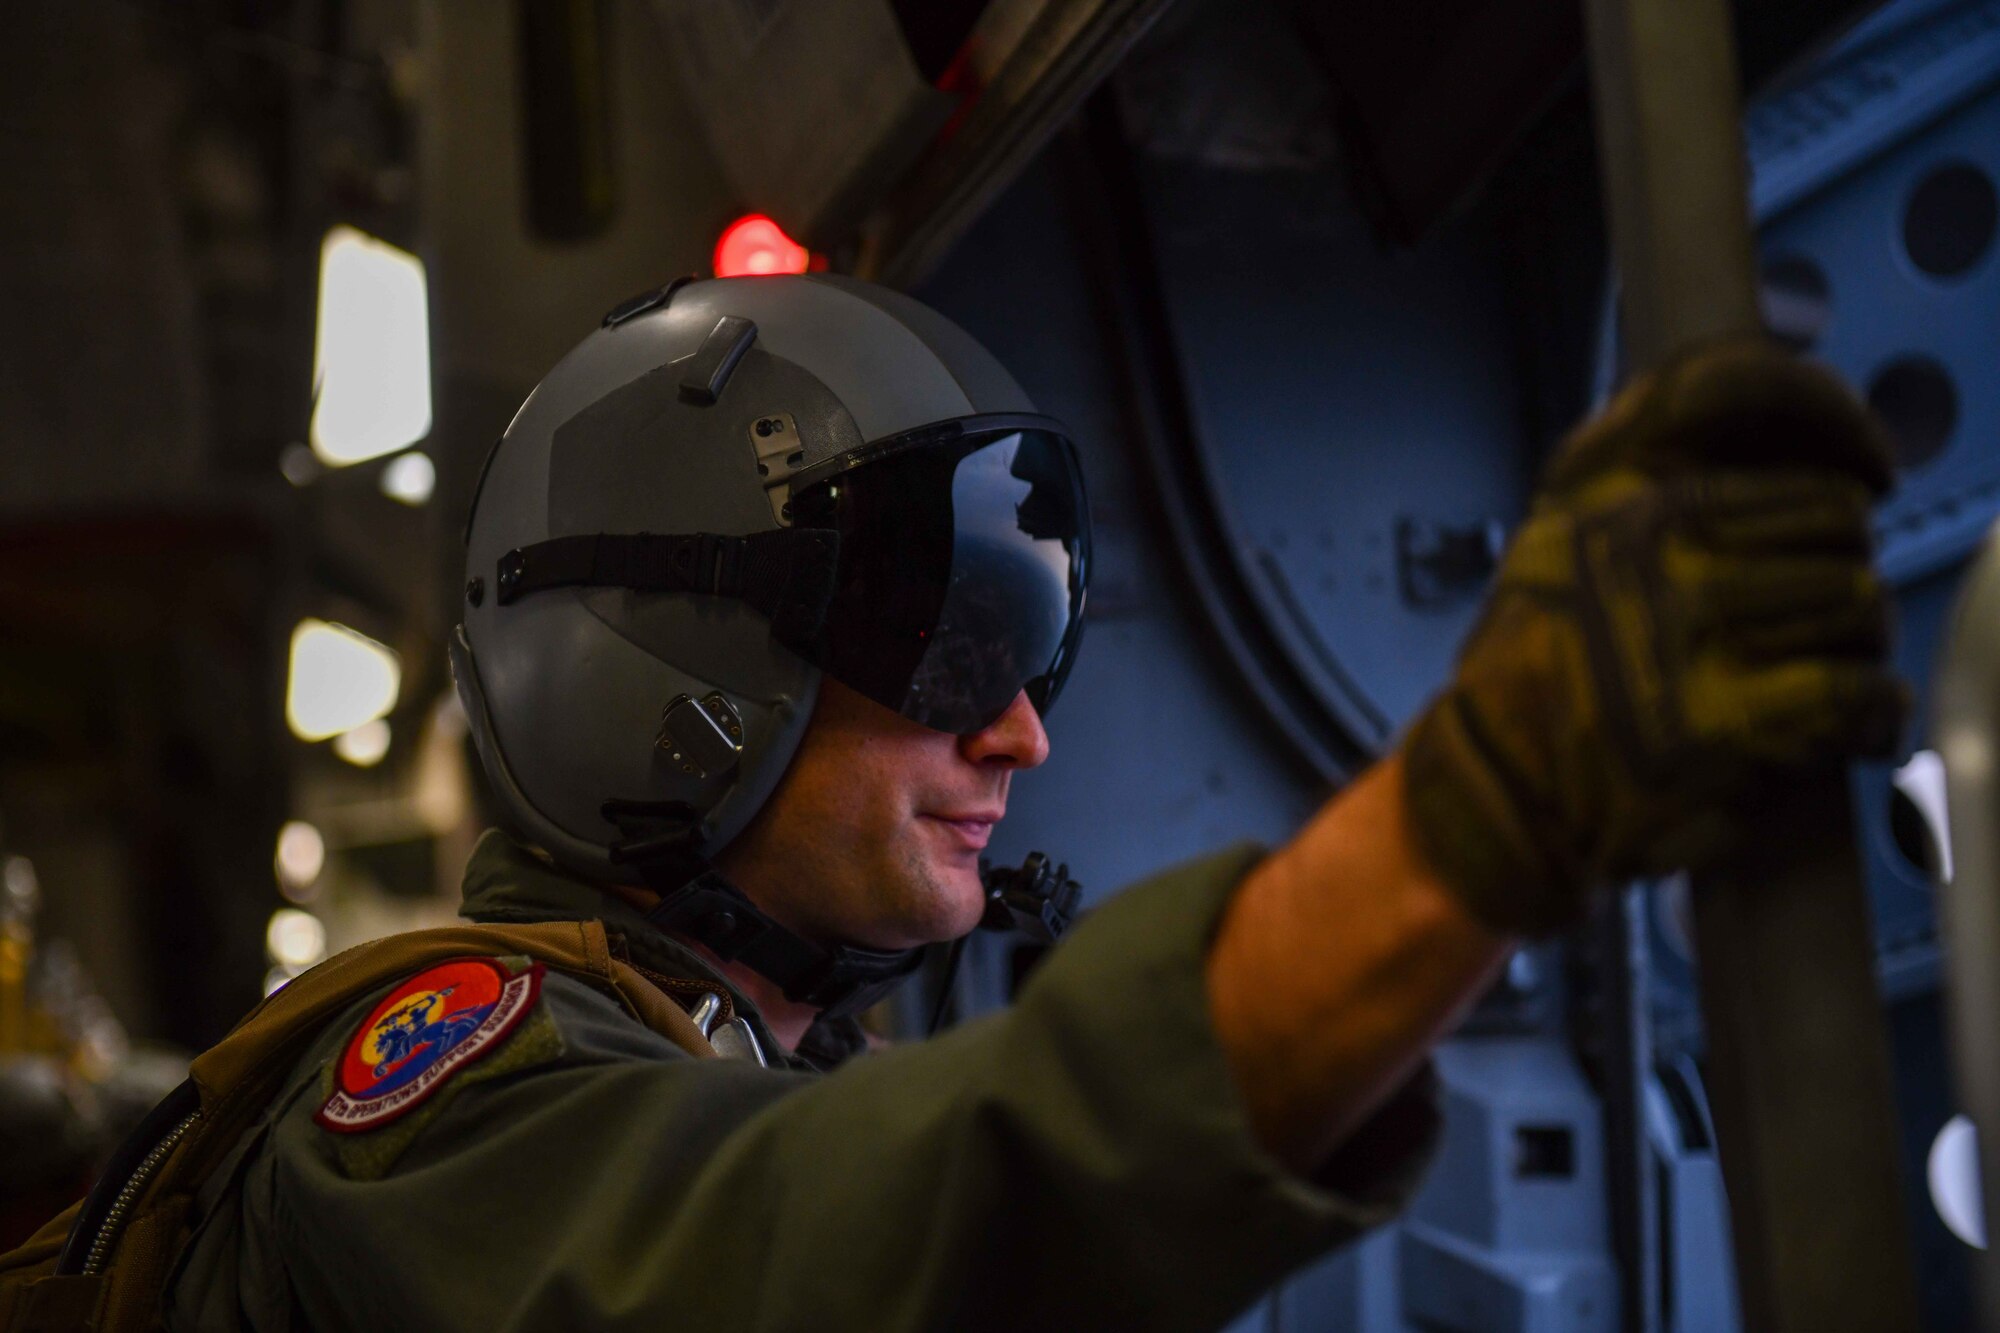 U.S. Air Force Staff Sgt. Stephen Spirlock, a 58th Airlift Squadron loadmaster from Altus Air Force Base, Oklahoma, looks out the door as it flies close to the Sicily Drop Zone near Fayetteville, North Carolina, Dec. 8, 2022. Operation Toy Drop lasted from Dec. 5-13, with aircrew from the 58th AS joining from Dec. 7-9. (U.S. Air Force photo by Airman 1st Class Kari Degraffenreed)